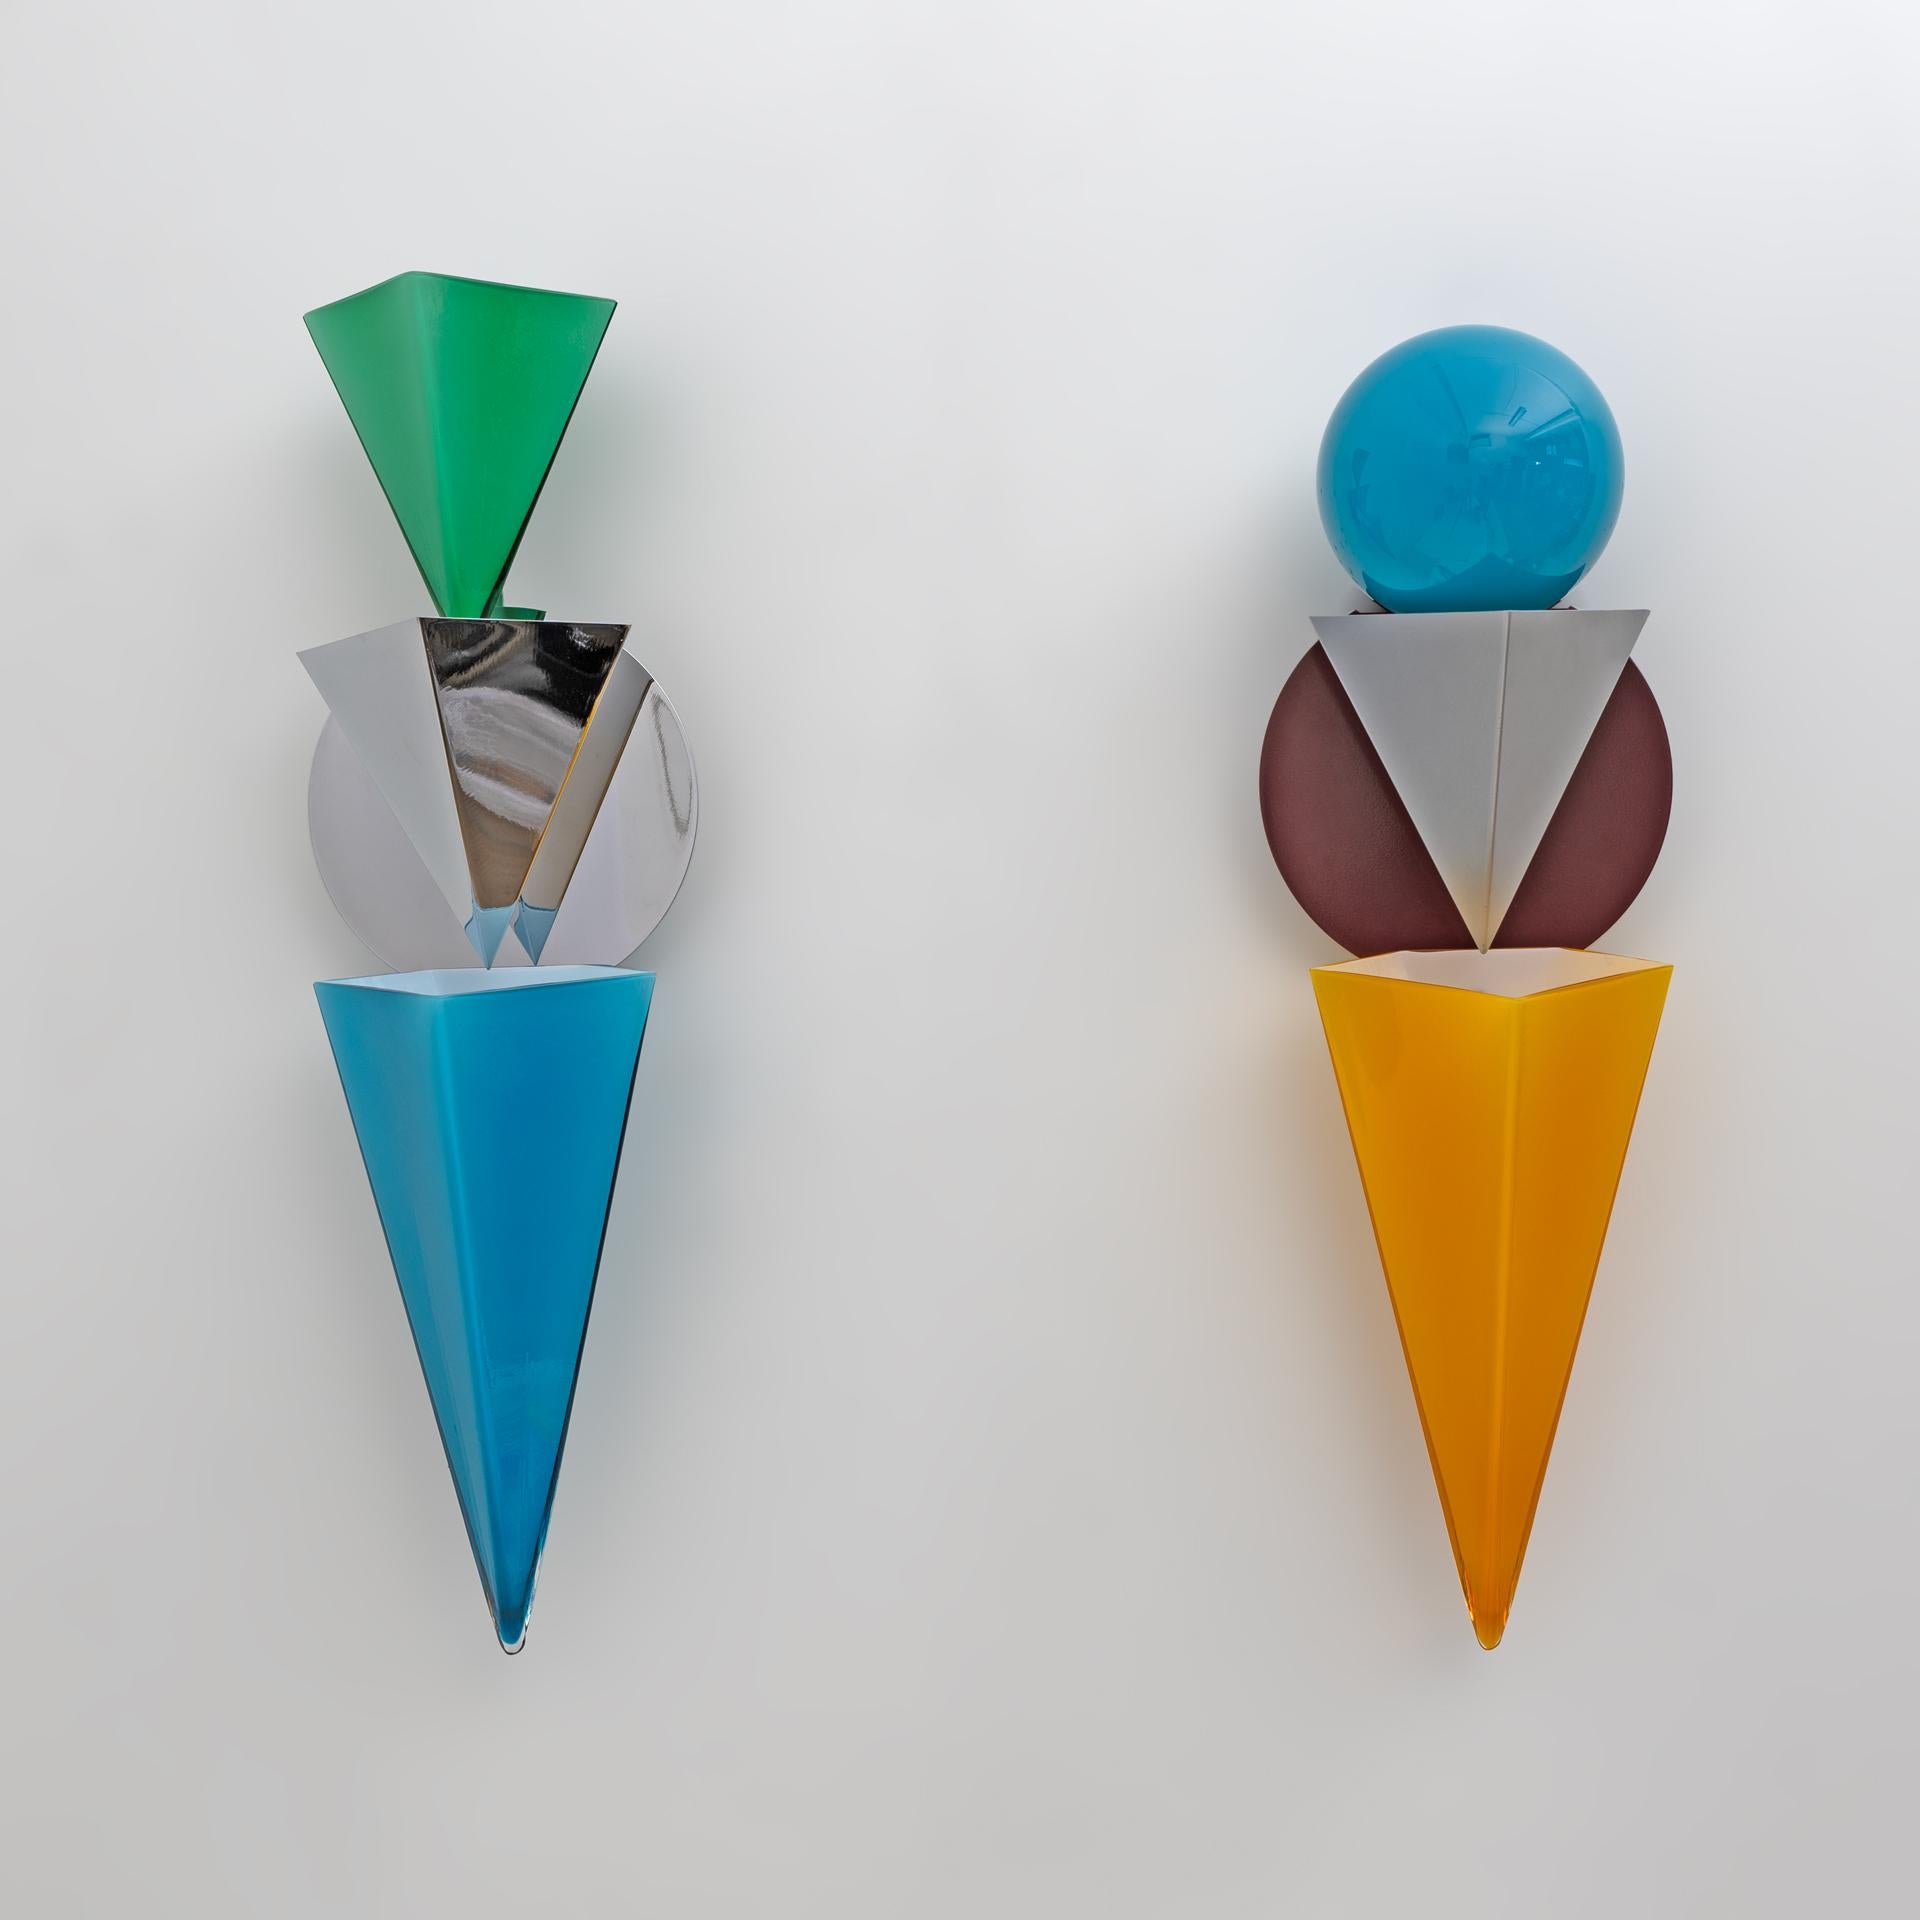 Rare wall lamps by Foscarini. Stunning geometric design with mouth-blown and primary colored laminated glass. Two halogen bulbs. Designed by Adam T. Tihani and Joseph Mancini.
Price for both lamps.